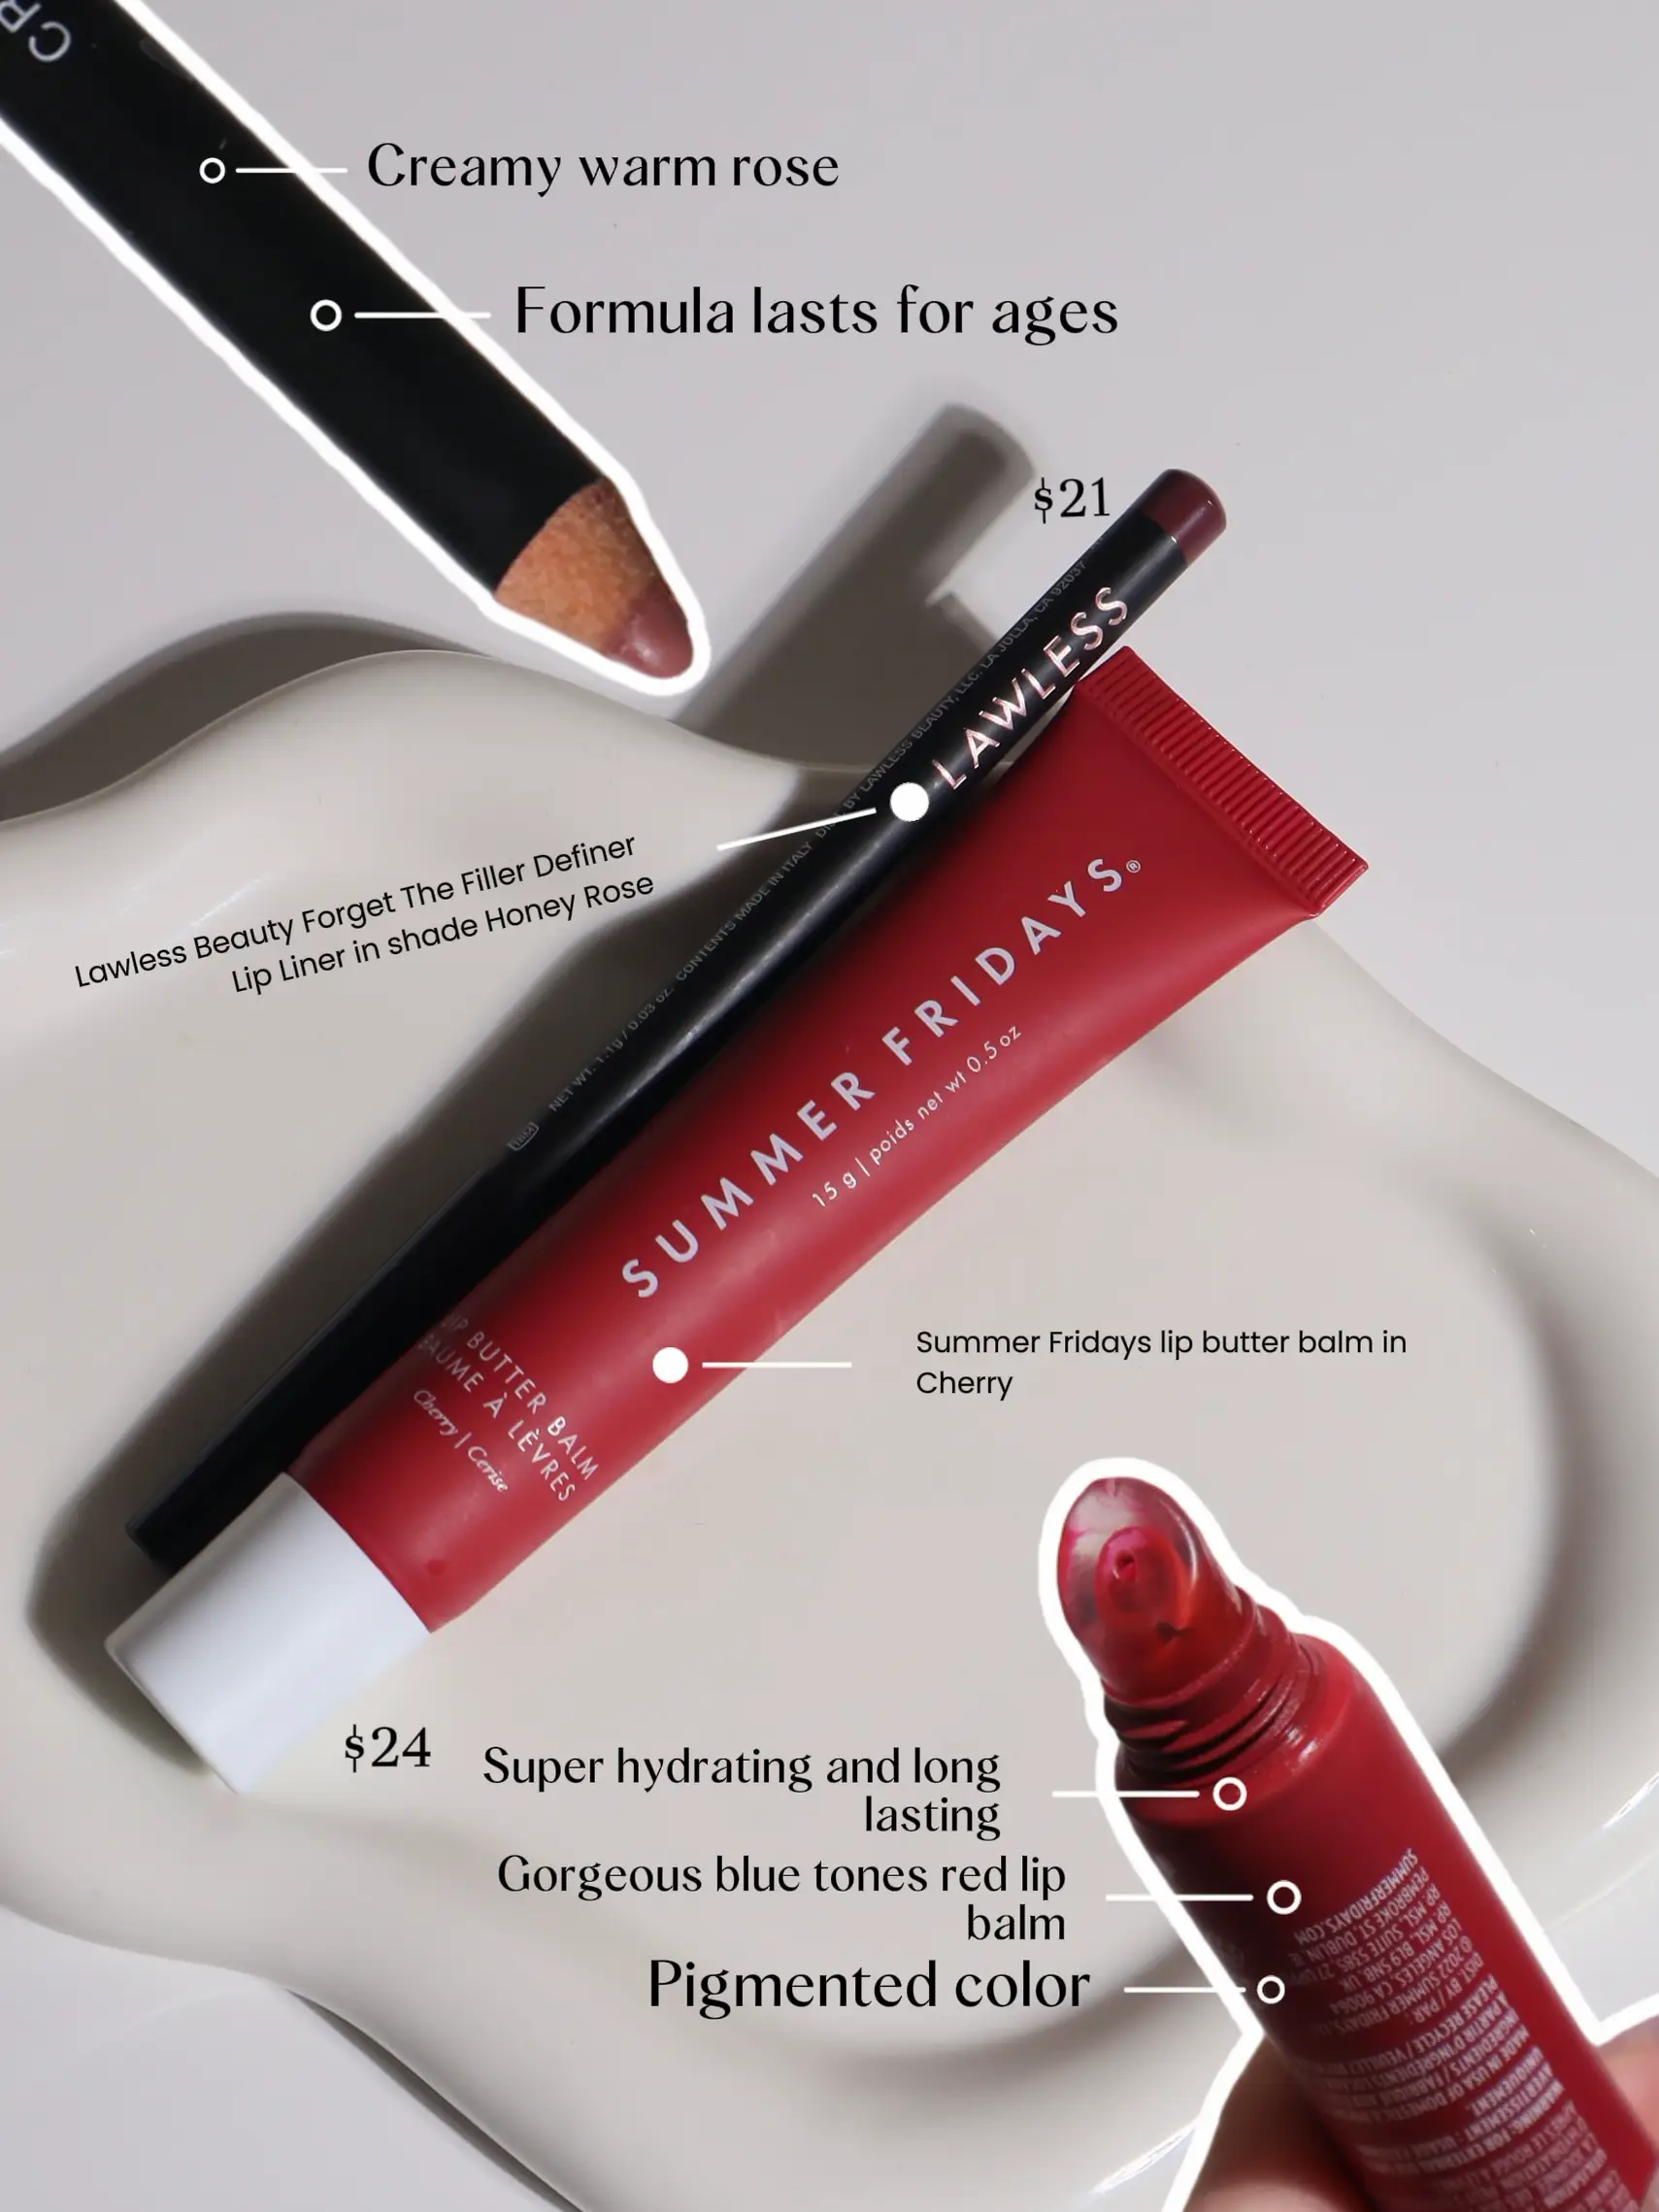 Has anyone tried Lawless lip liner in Honey Rose? Looking for NYX